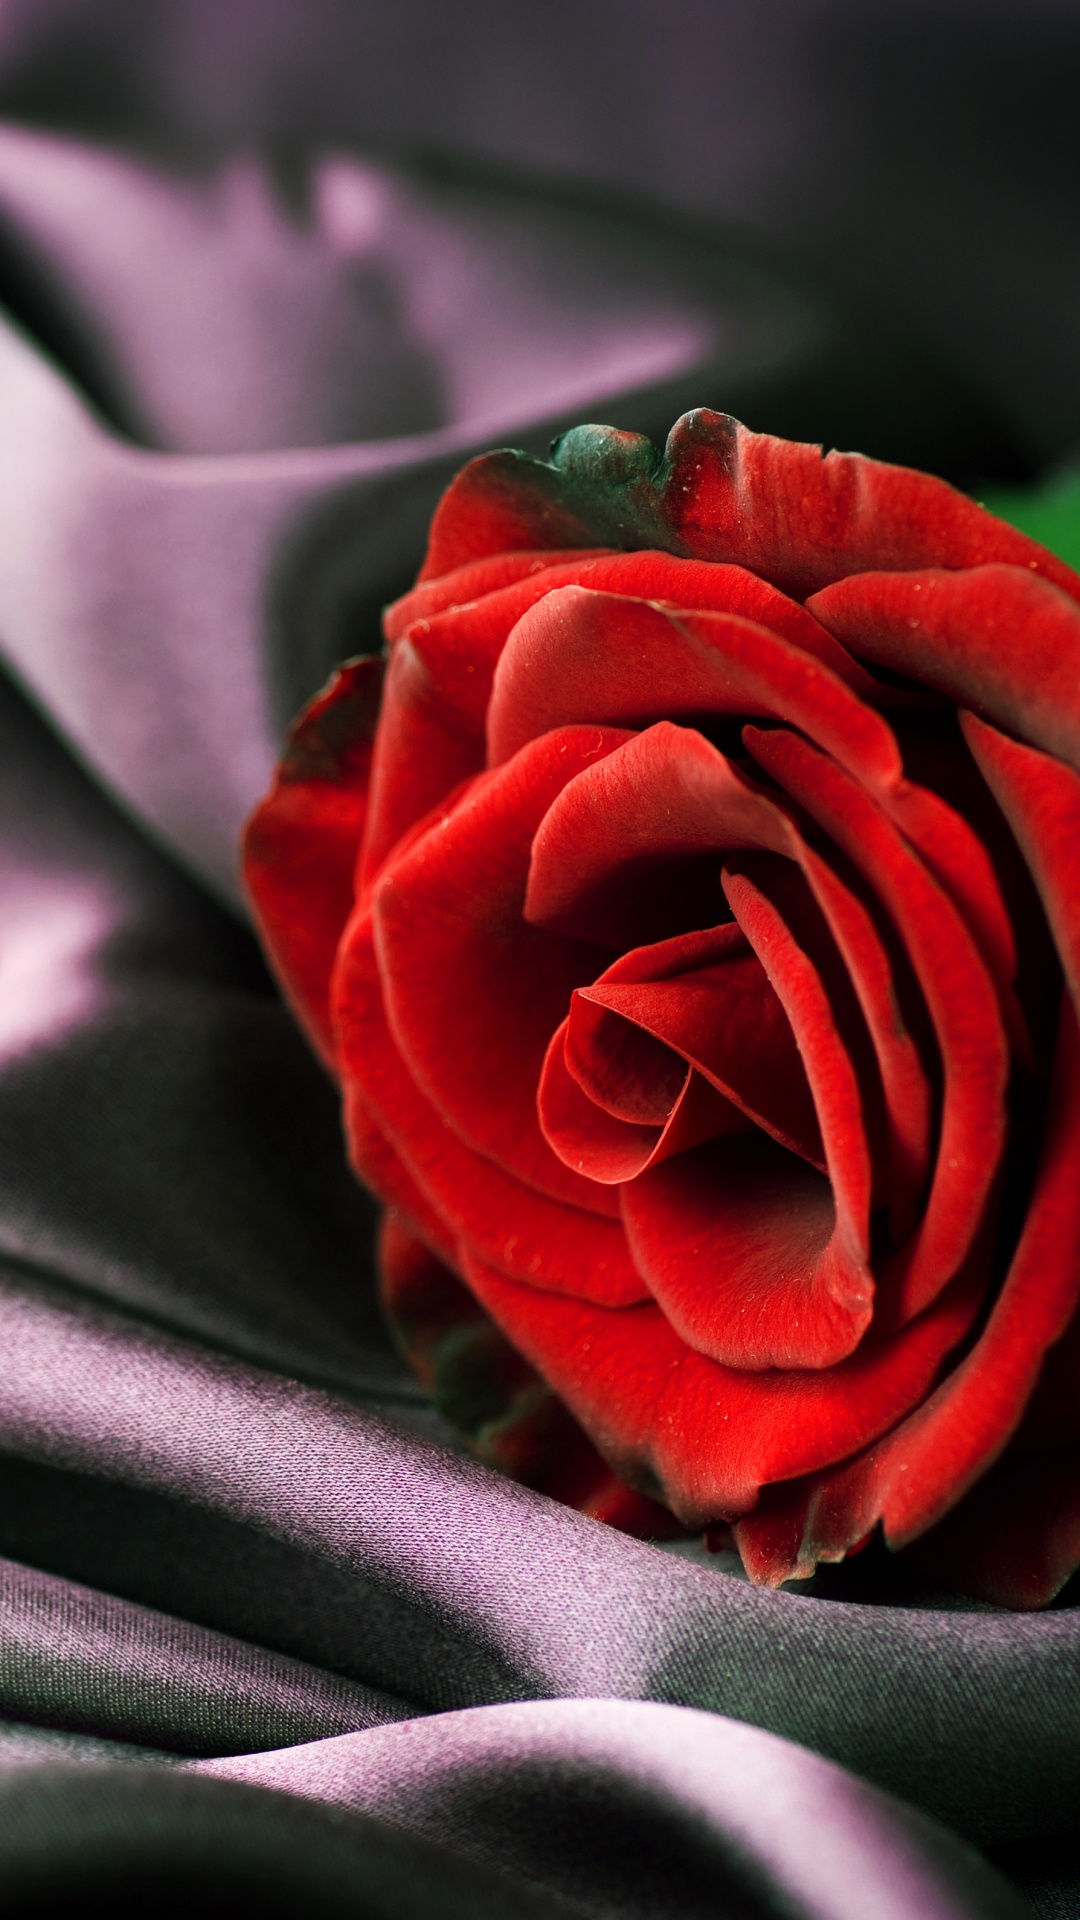 Red Rose on Gray Textile. Wallpaper in 1080x1920 Resolution